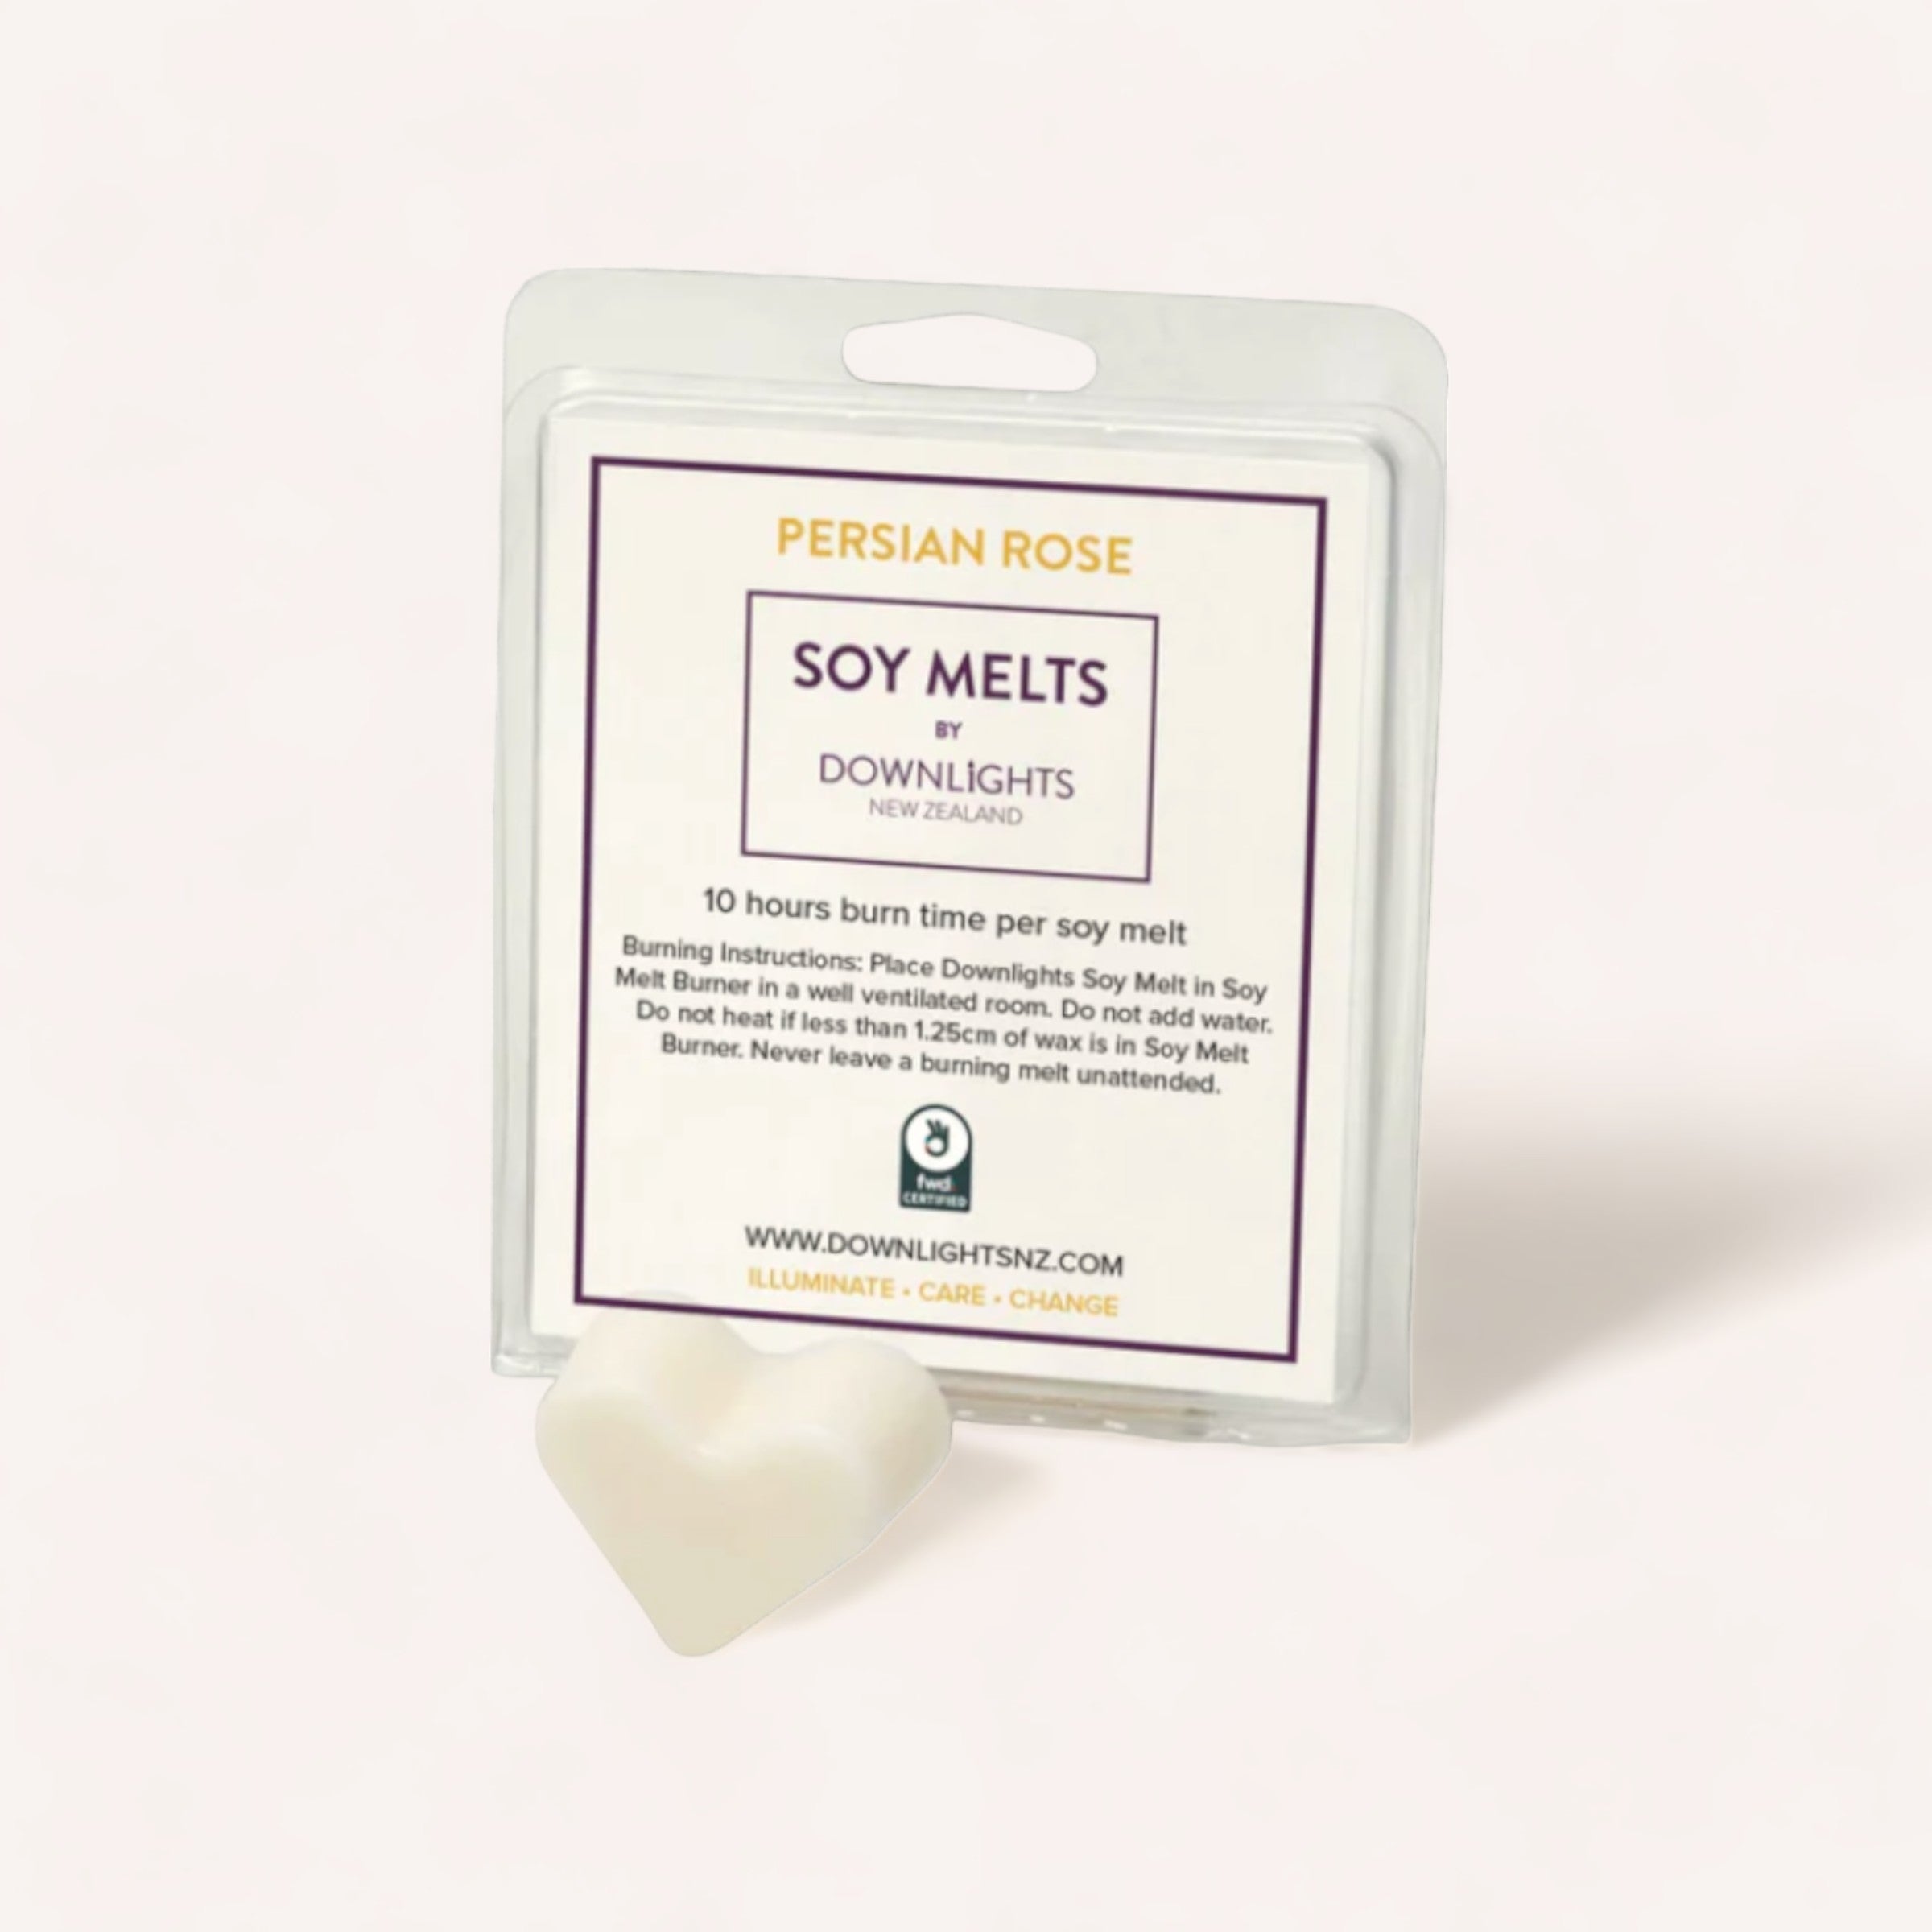 A package of Persian Rose Heart Soy Melts by Downlights, a New Zealand brand, with a single heart-shaped melt placed in front of it.